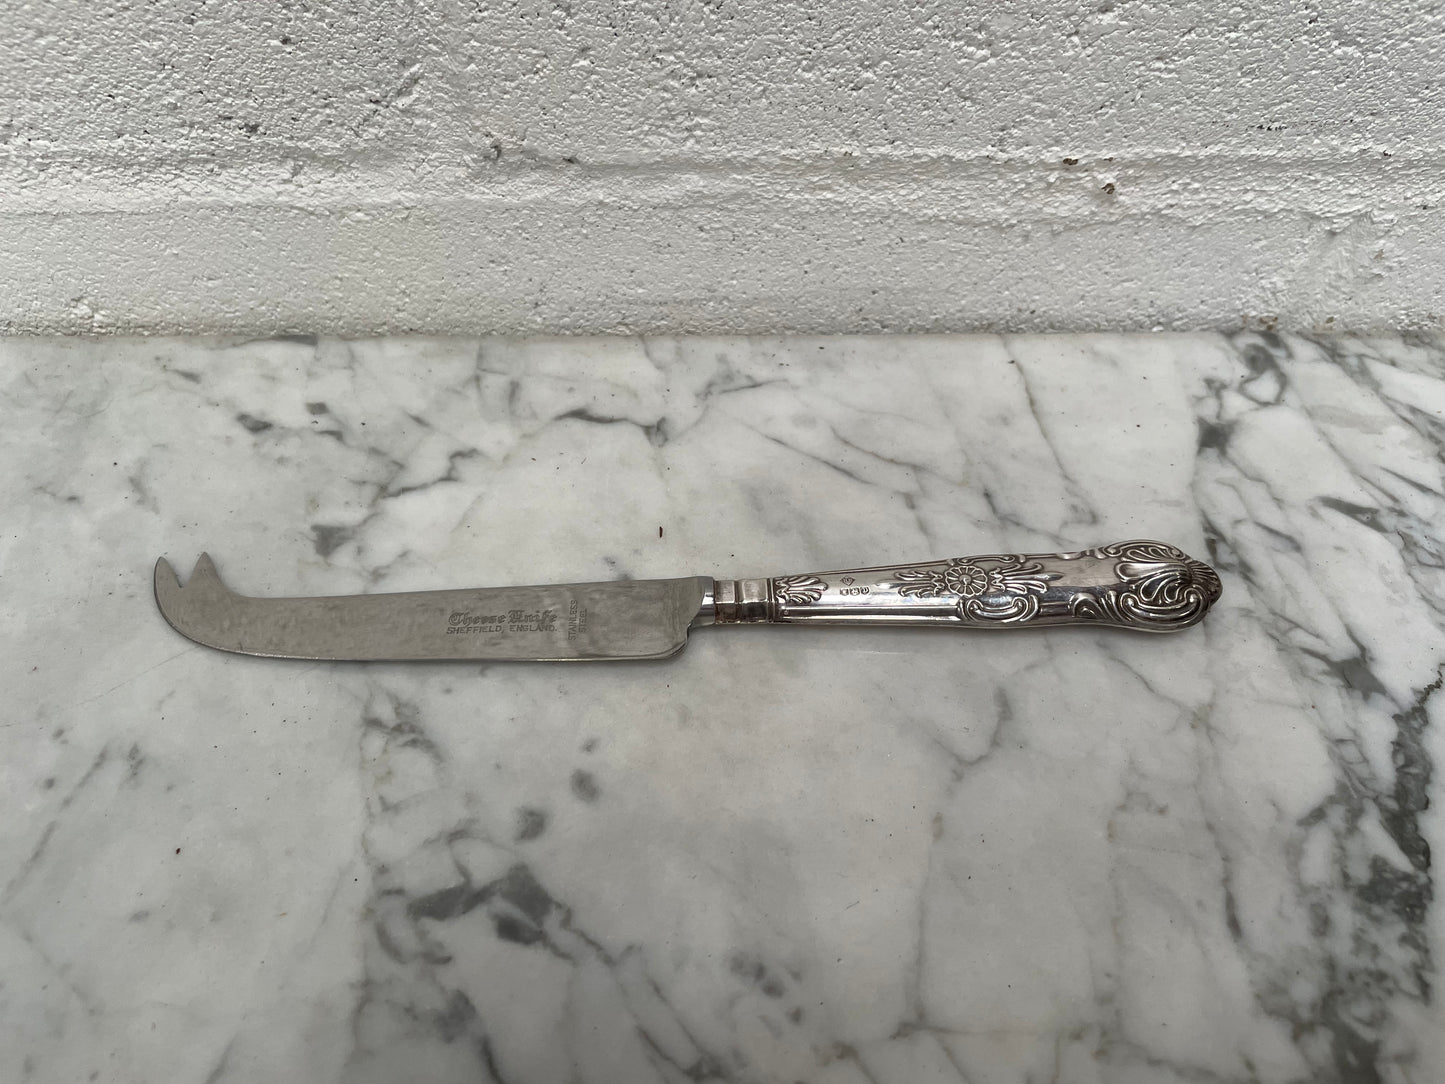 Decorative Sheffield sterling silver cheese knife. The handle has sterling silver hallmarks and the blade is stainless steel. Made in England and is in good original condition. 